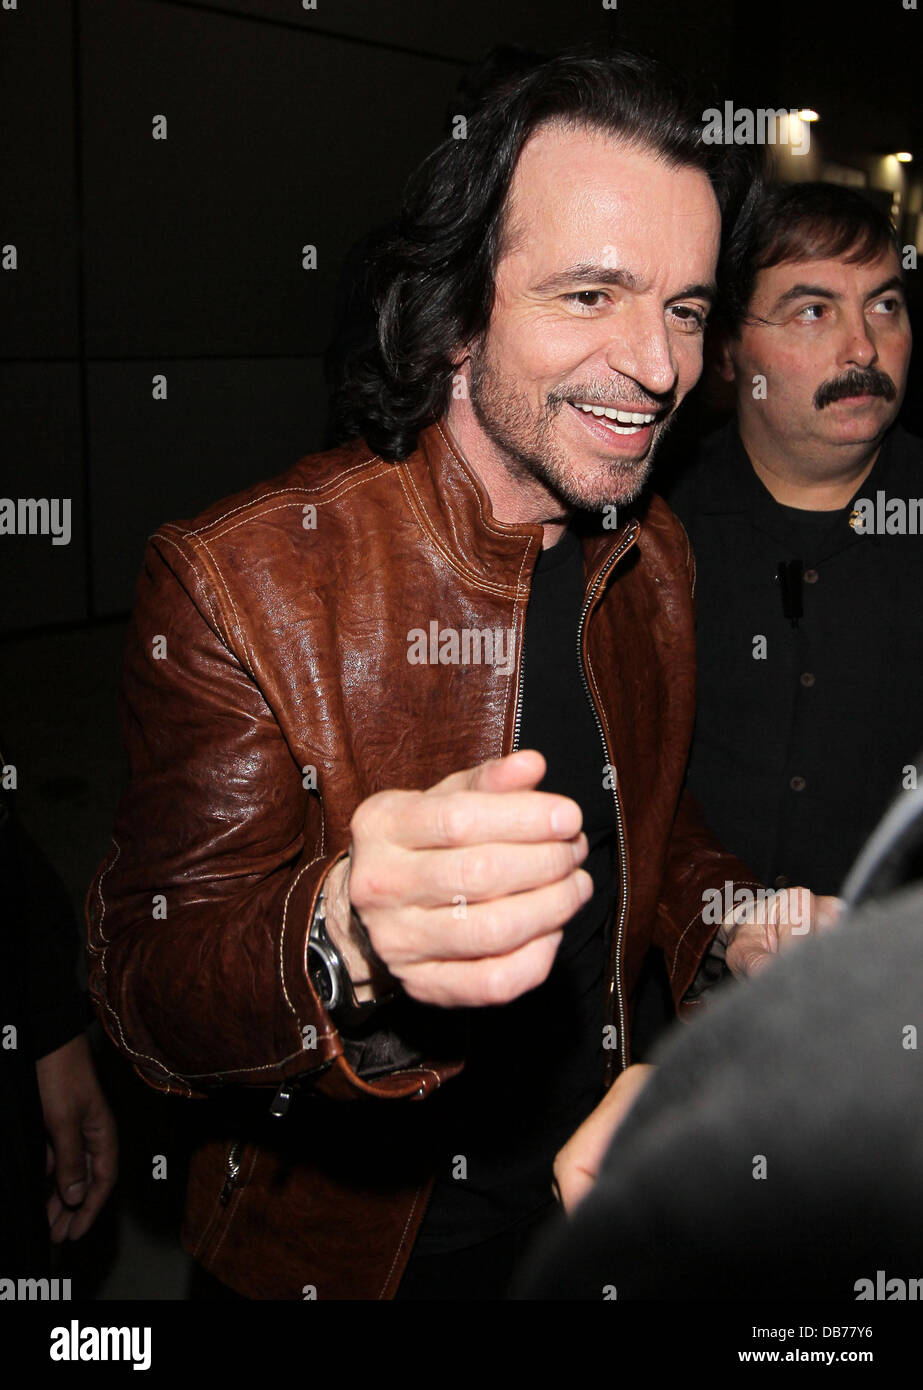 Yanni meets and greets fans outside the Nokia Center after his performance Los Angeles, California - 08.05.11 Stock Photo